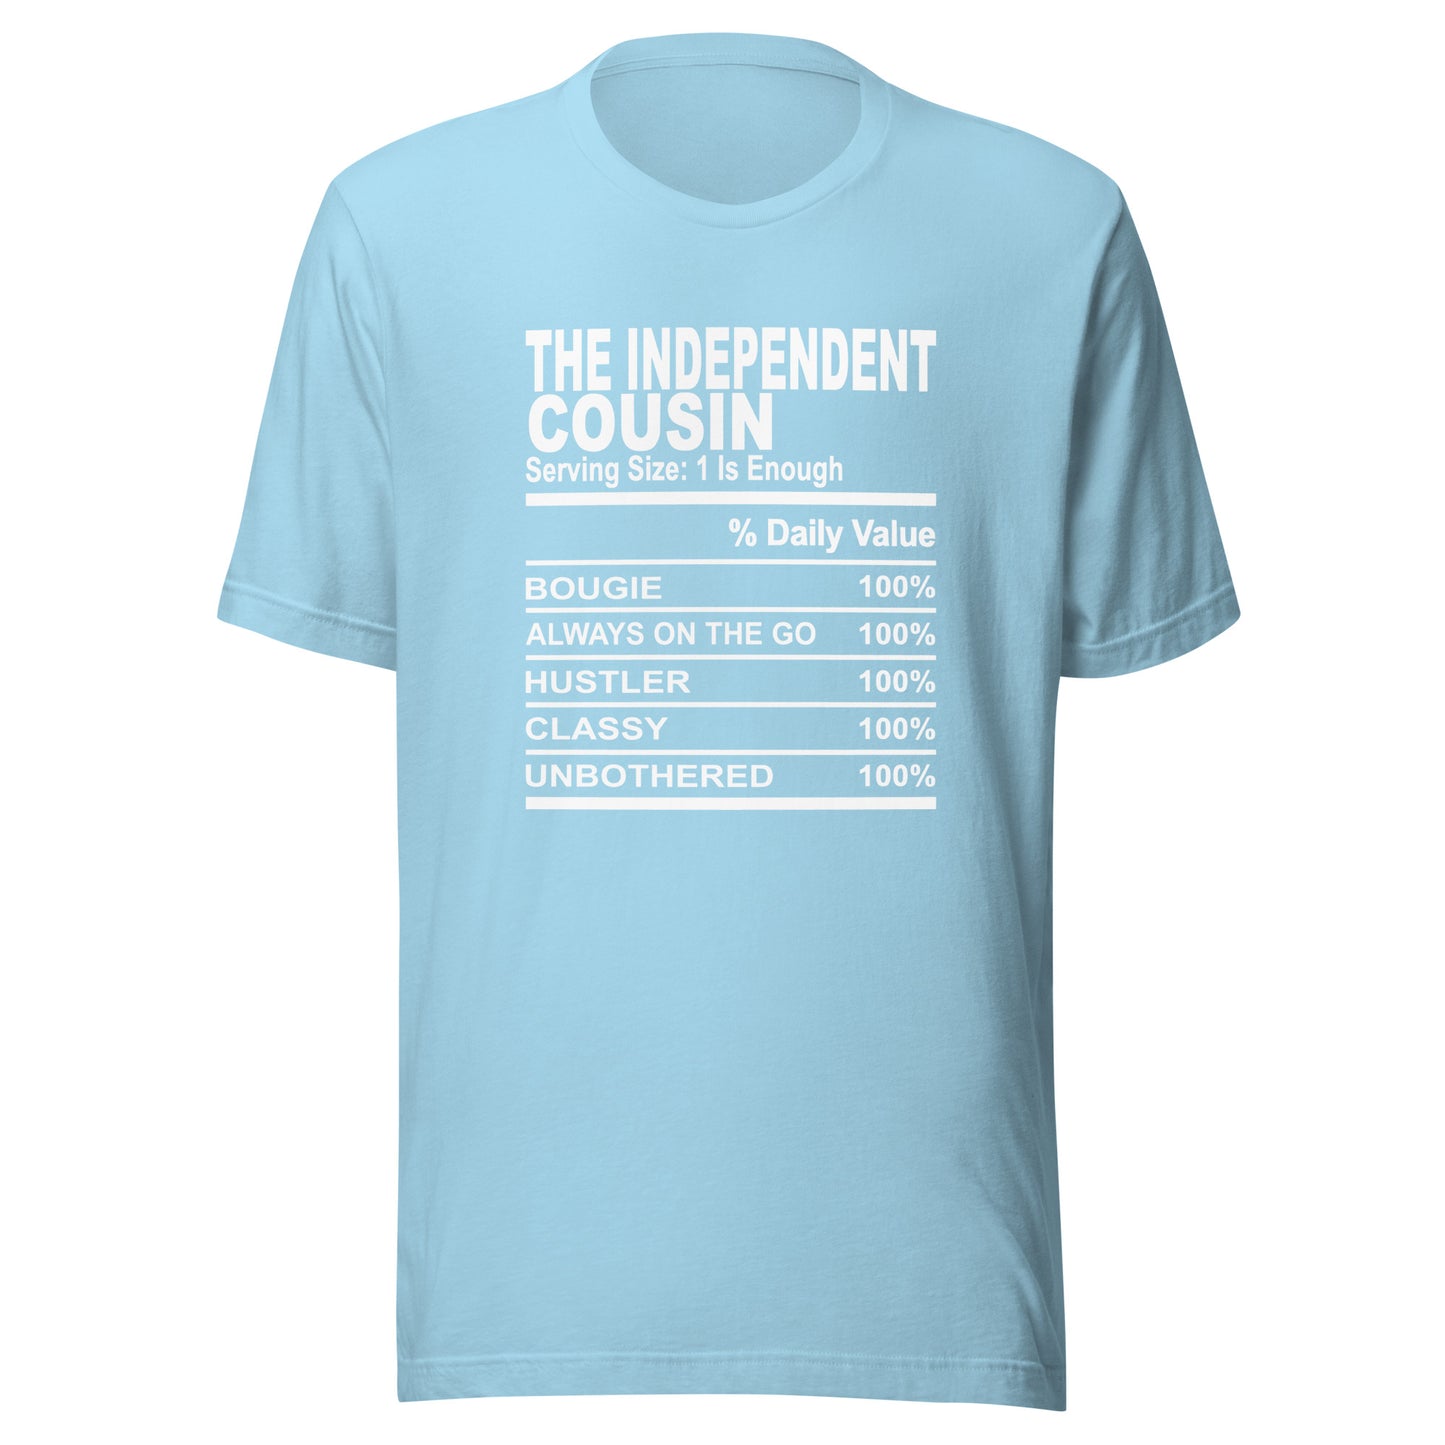 THE INDEPENDENT COUSIN - L-XL - Unisex T-Shirt (white print)